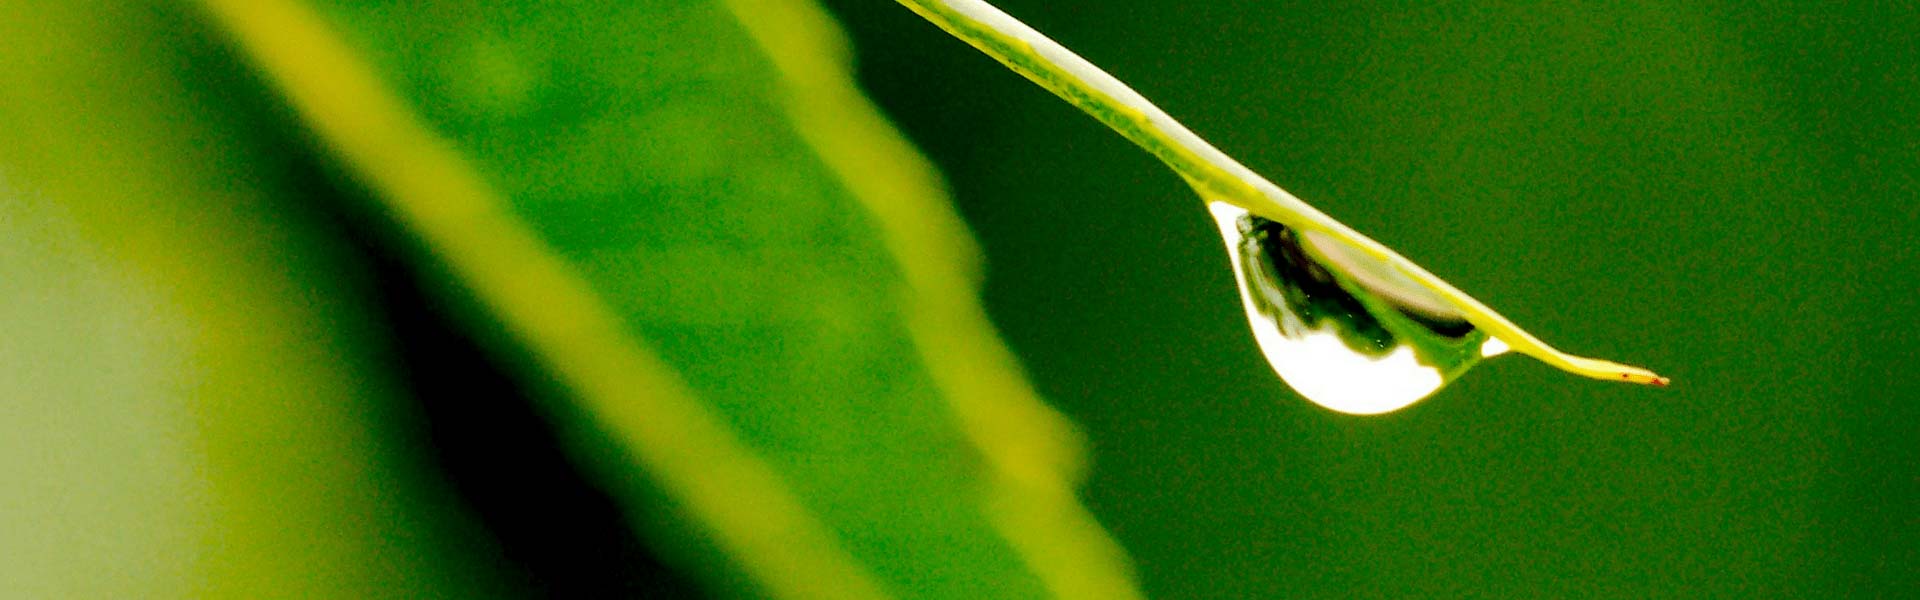 Closeup of a water droplet on a blade of grass